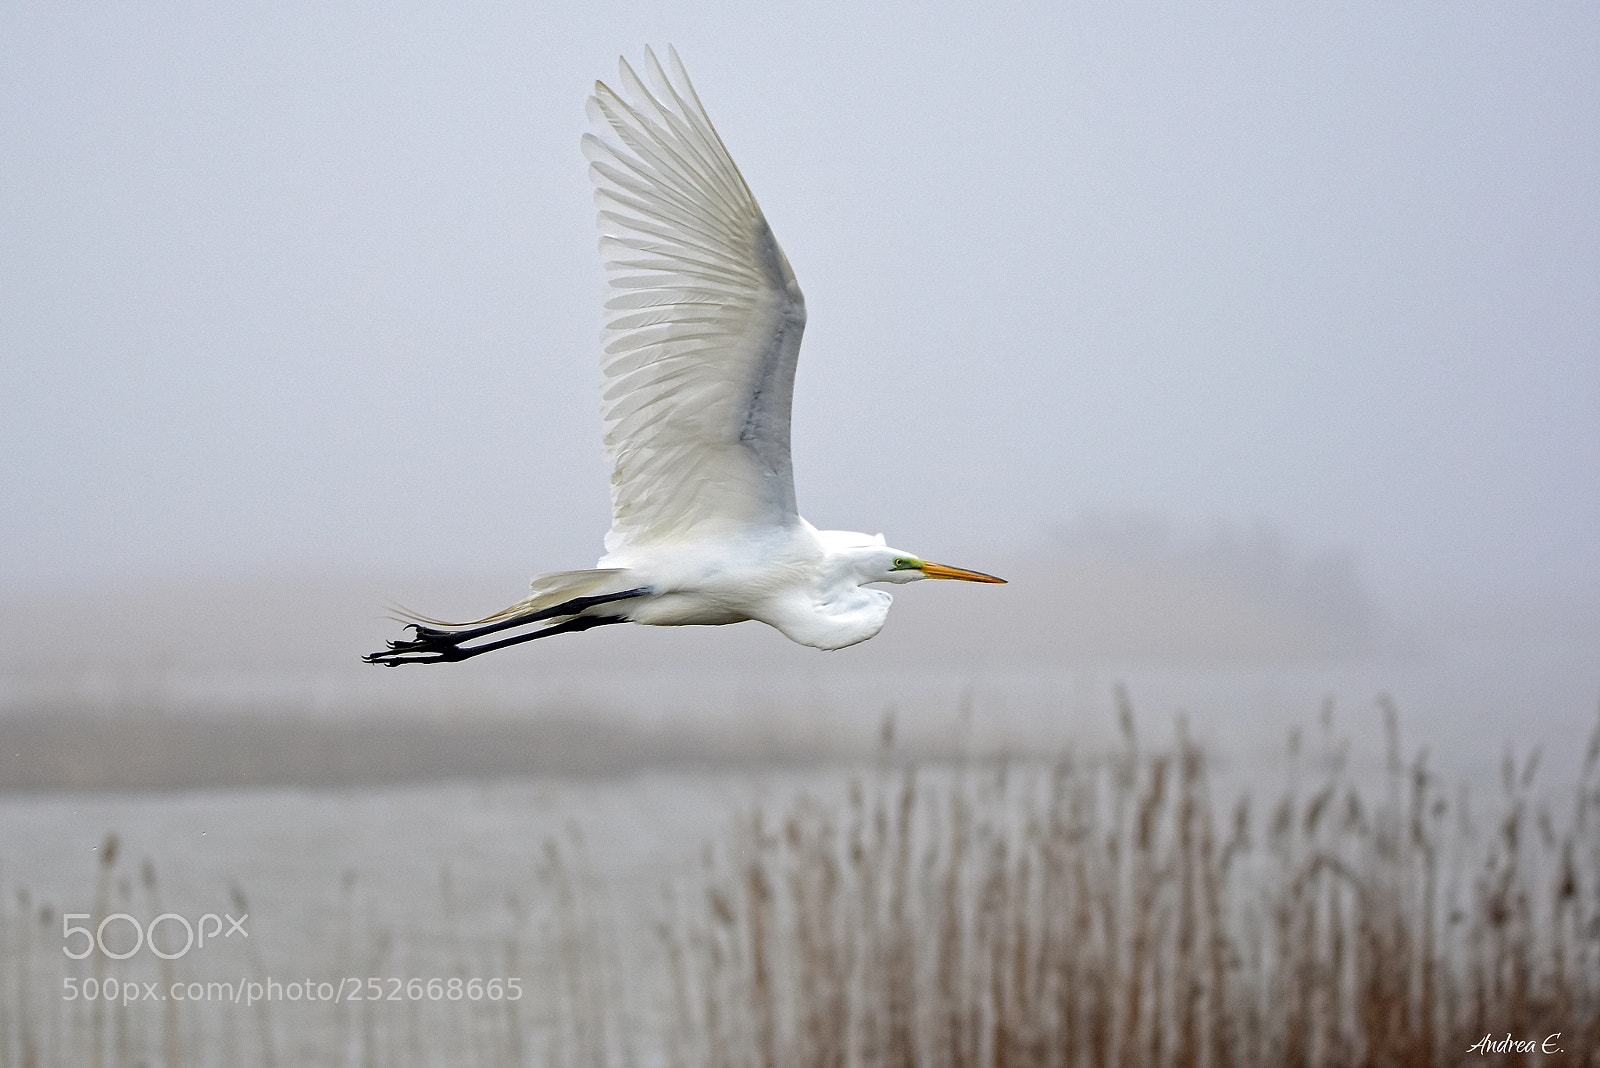 Nikon D7200 sample photo. Just another great egret photography